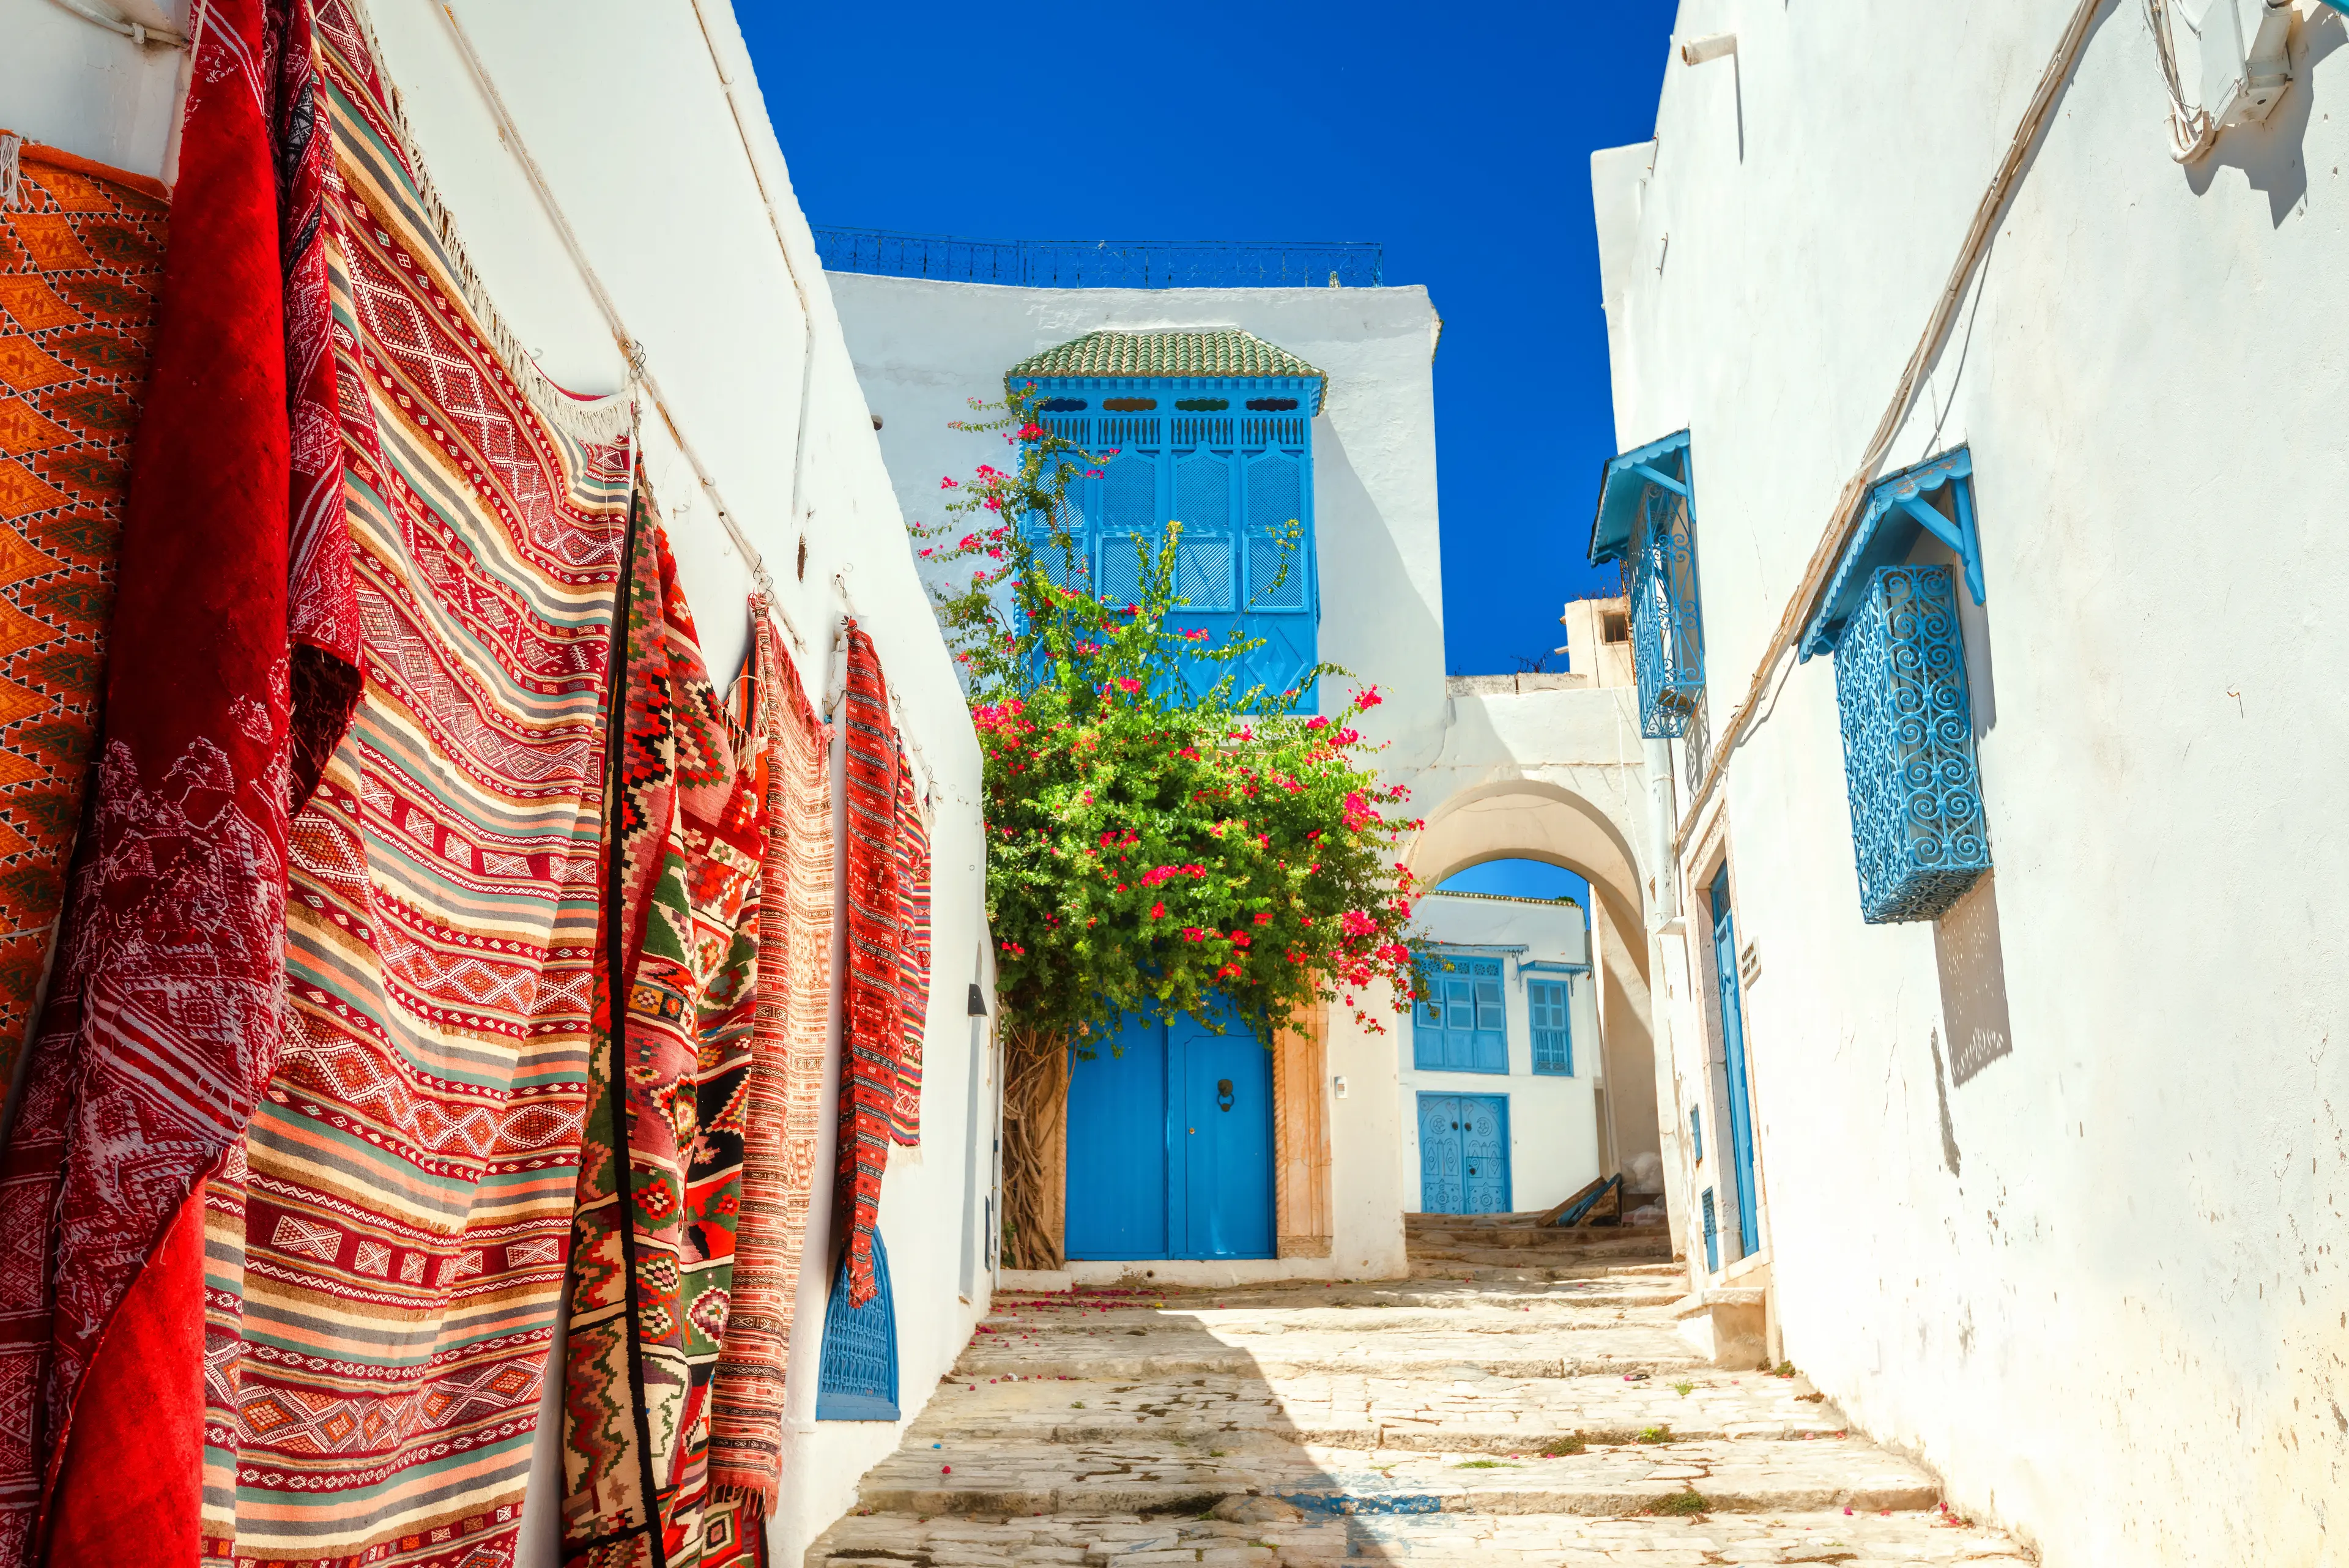 Whitewashed houses with colorful carpets